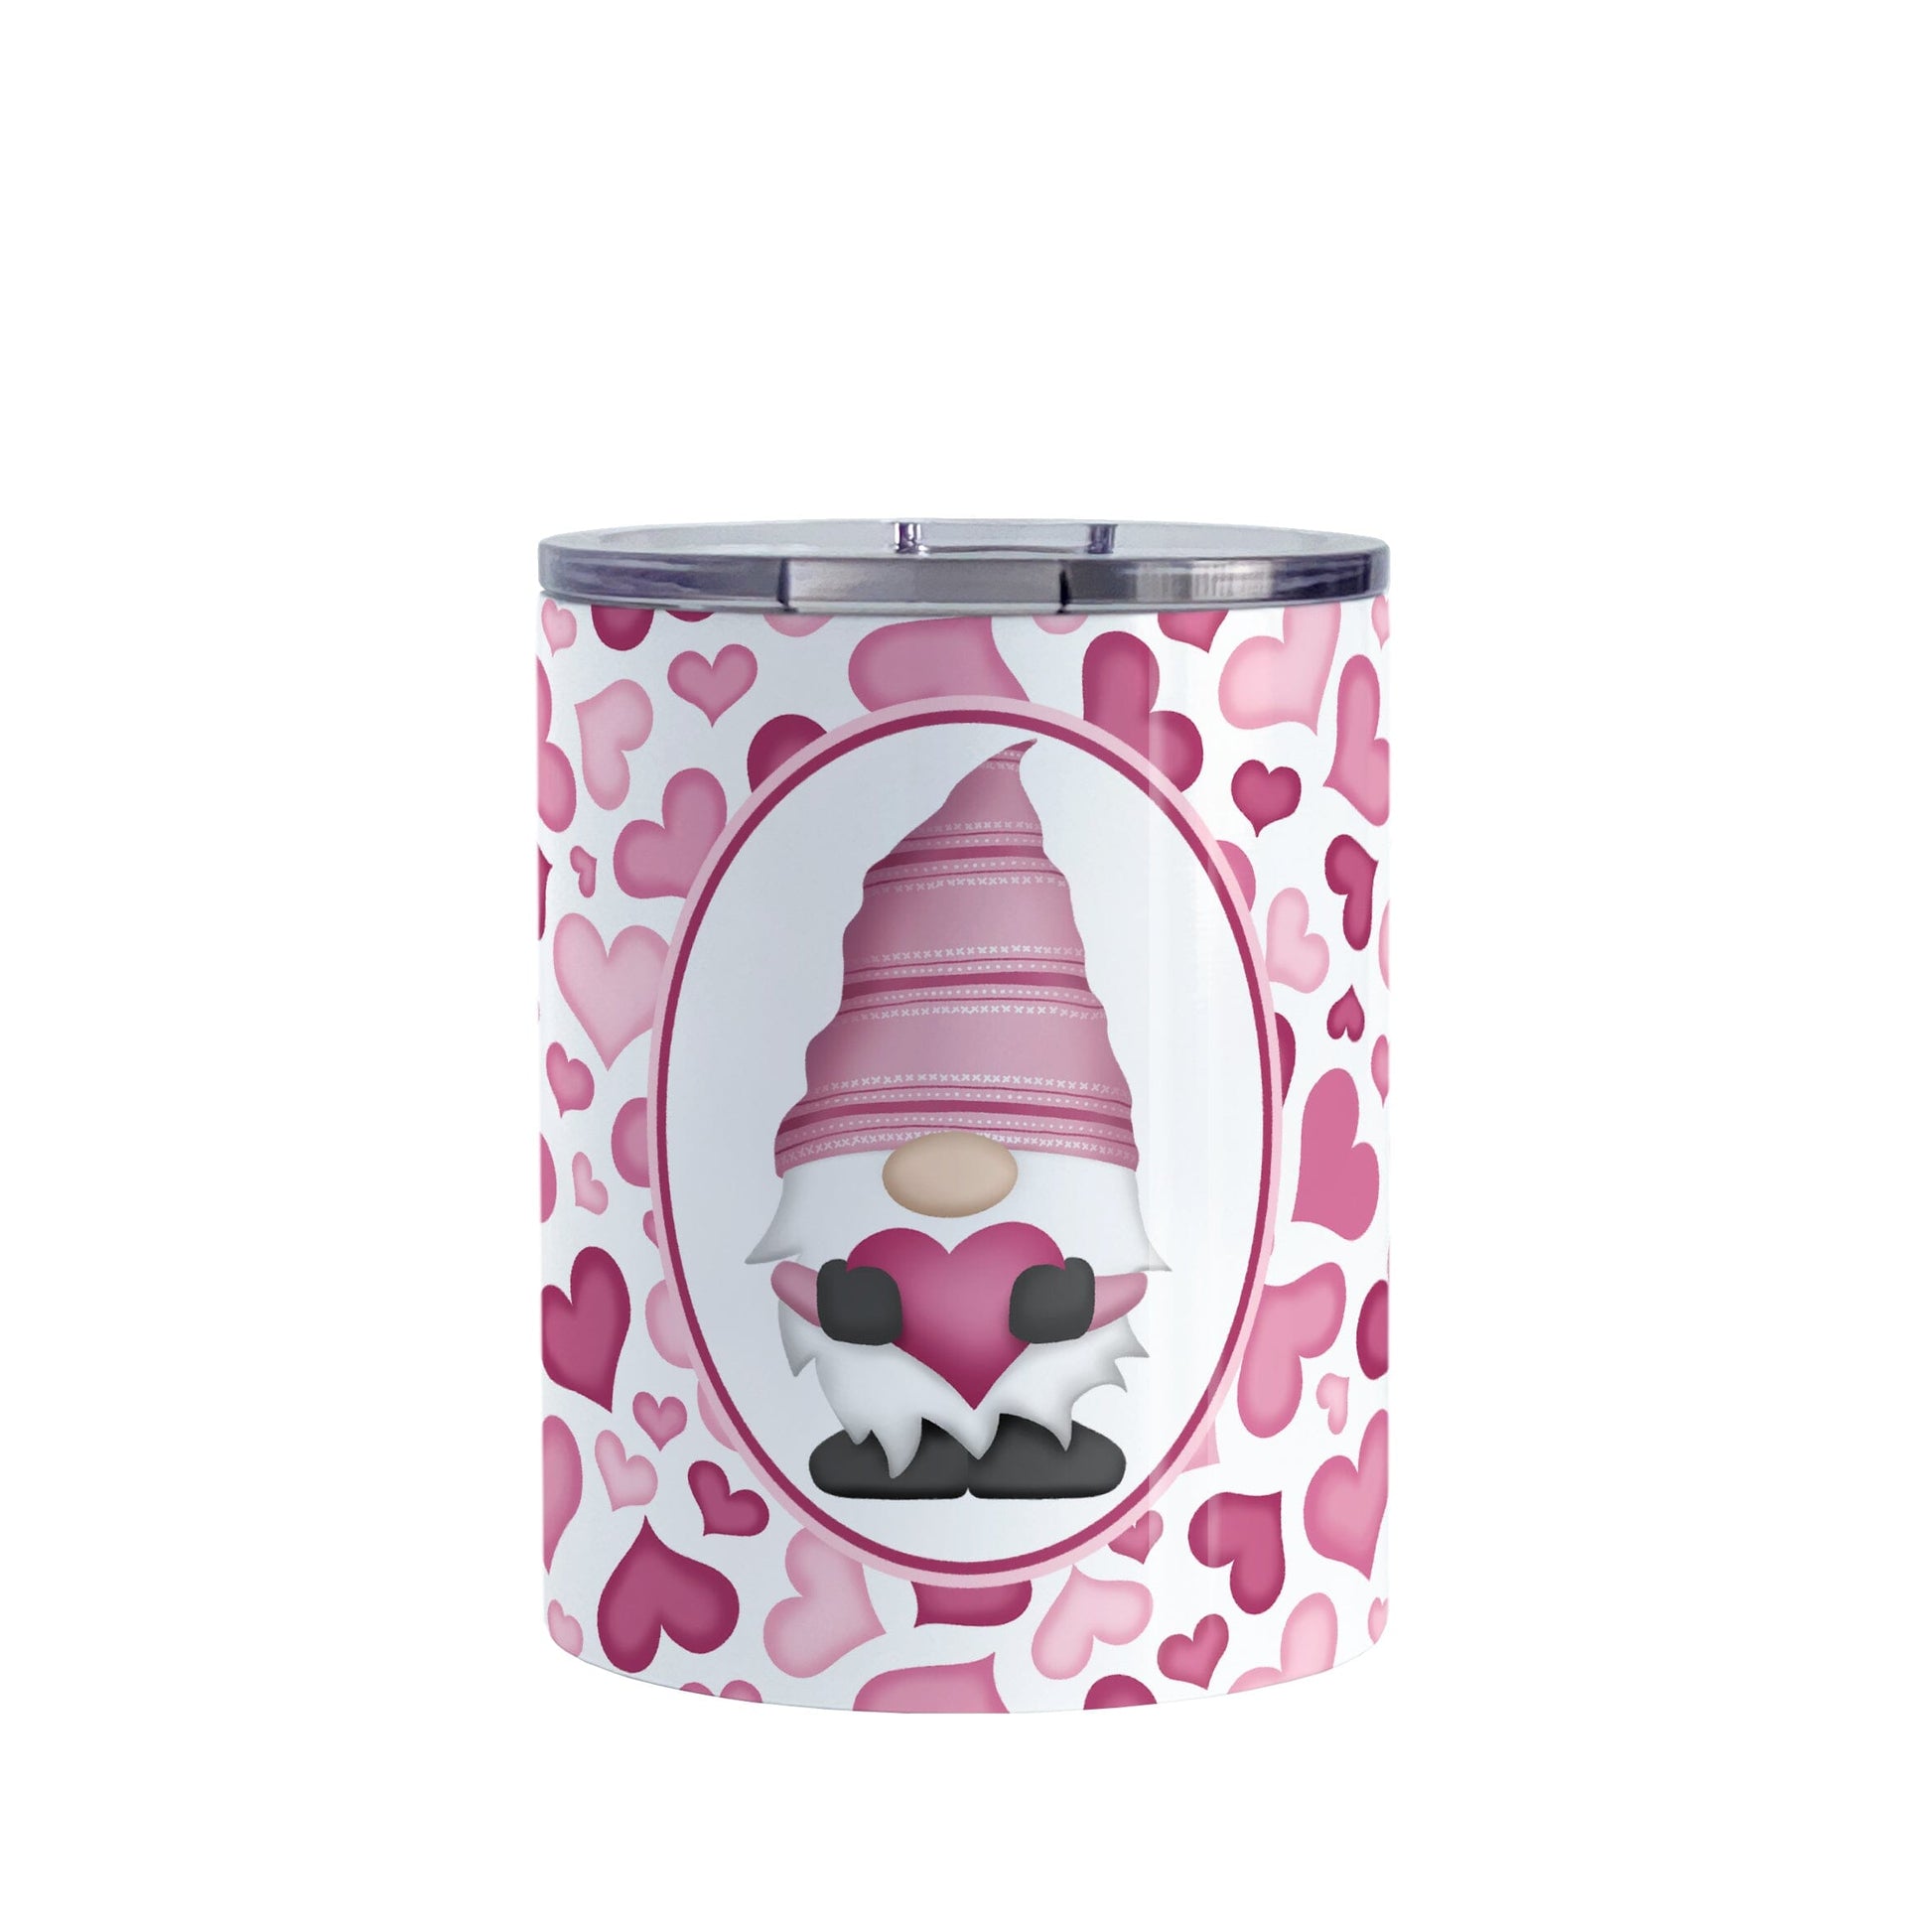 Pink Gnome Hearts Tumbler Cup (10oz) at Amy's Coffee Mugs. A stainless steel tumbler cup designed with an adorable pink gnome holding a heart in a white oval over a pattern of cute hearts in different shades of pink that wrap around the cup.